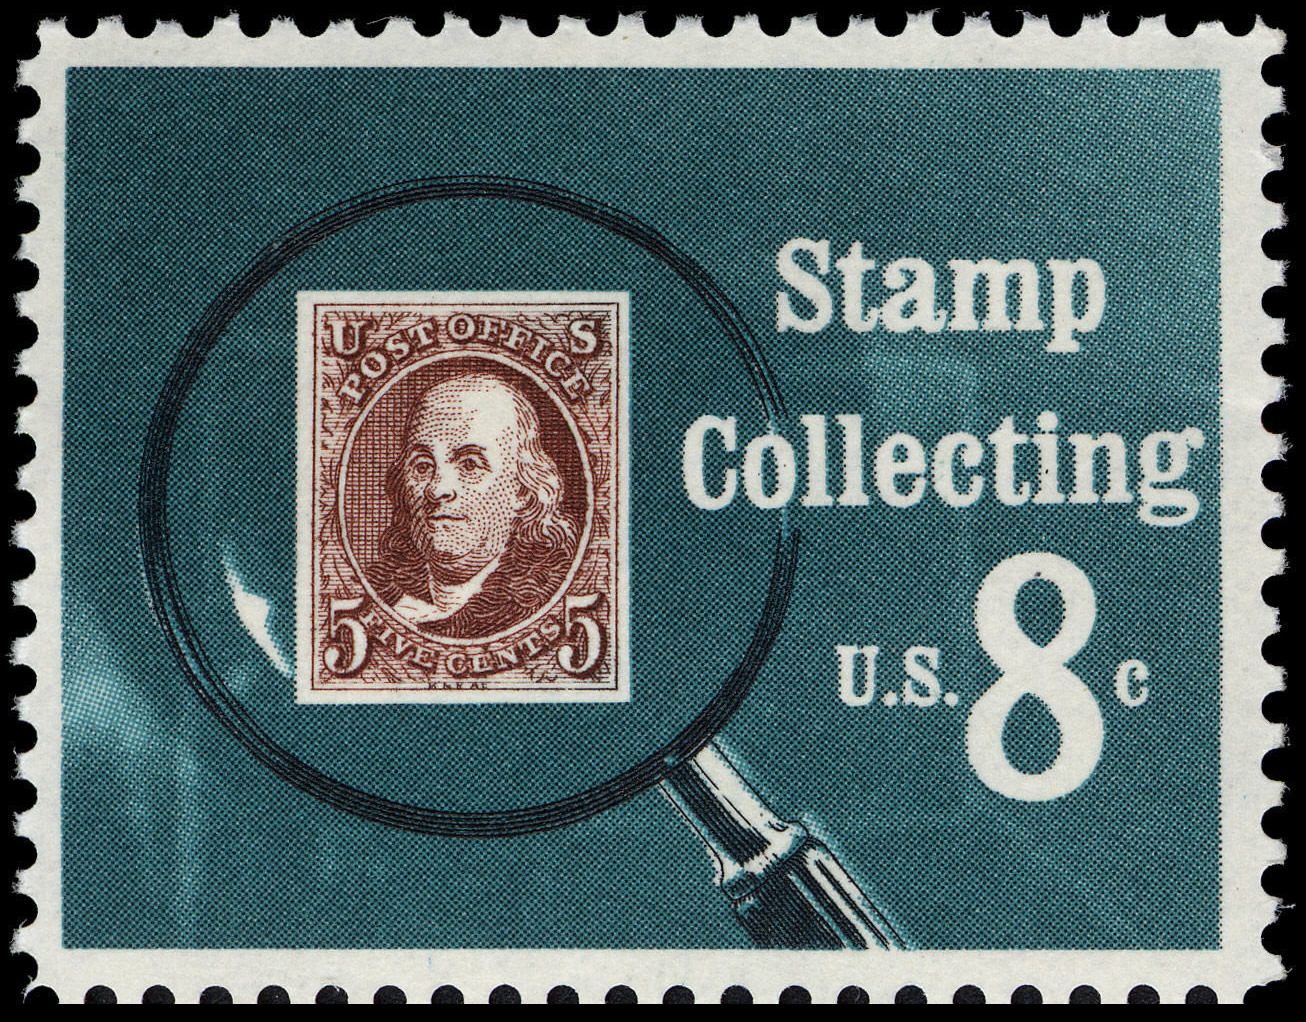 Why Stamp Collectors Hated a 1972 Stamp Designed Just for Them - Atlas  Obscura